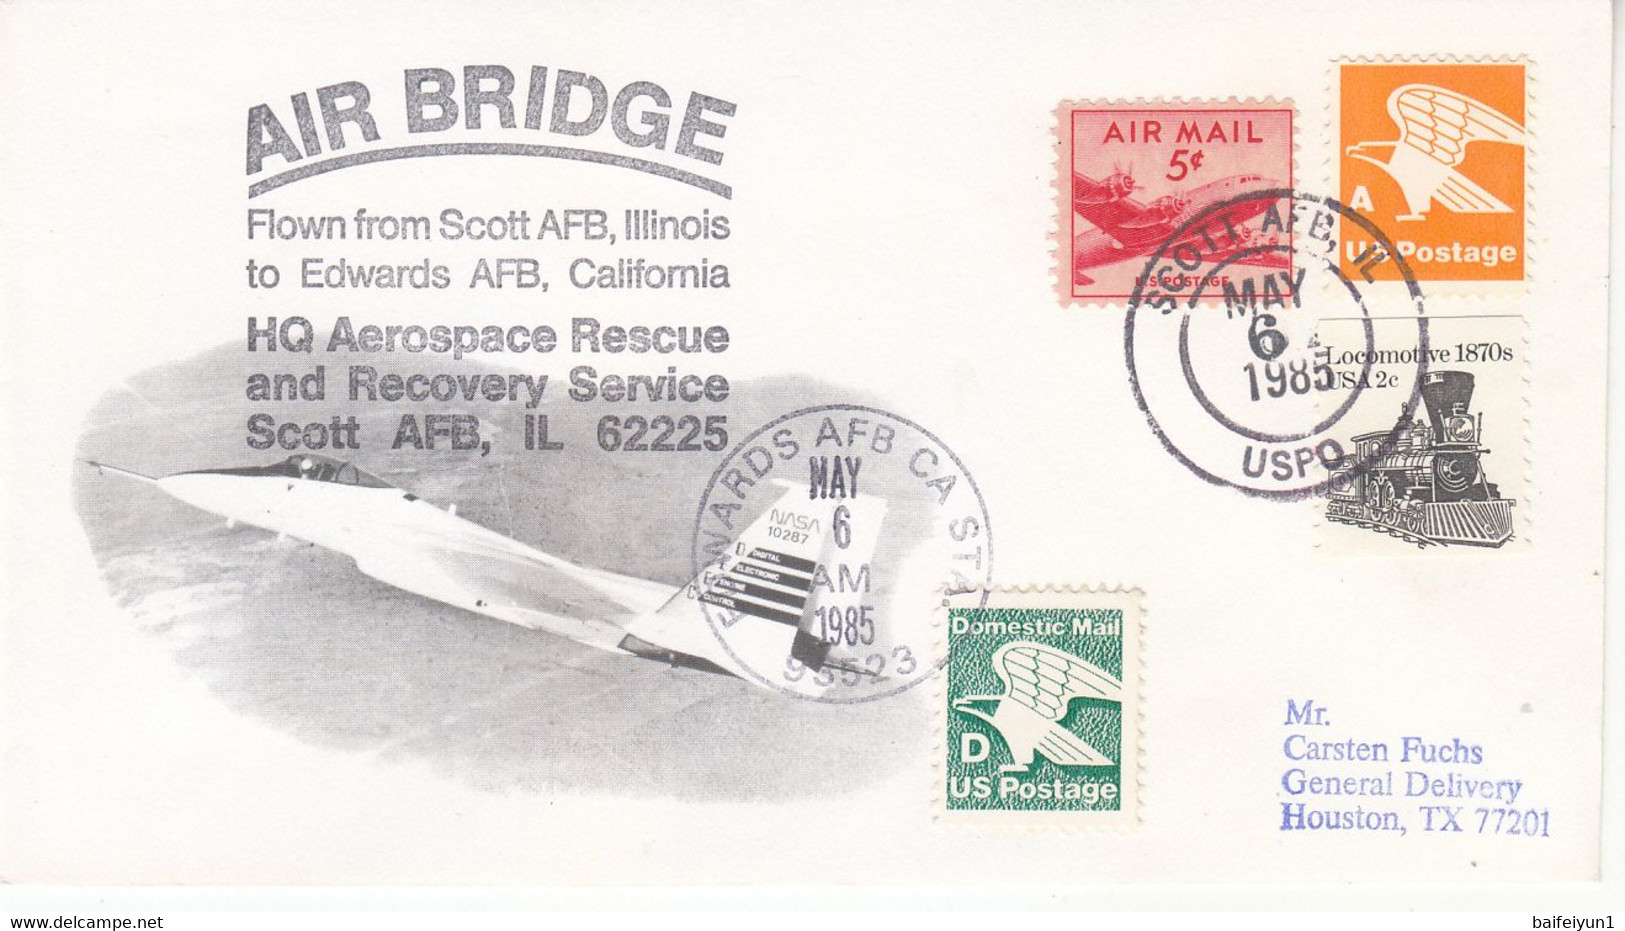 1985 USA  Space Shuttle Challenger STS-51B  Mission And Air Bridge  Commemorative Cover - América Del Norte